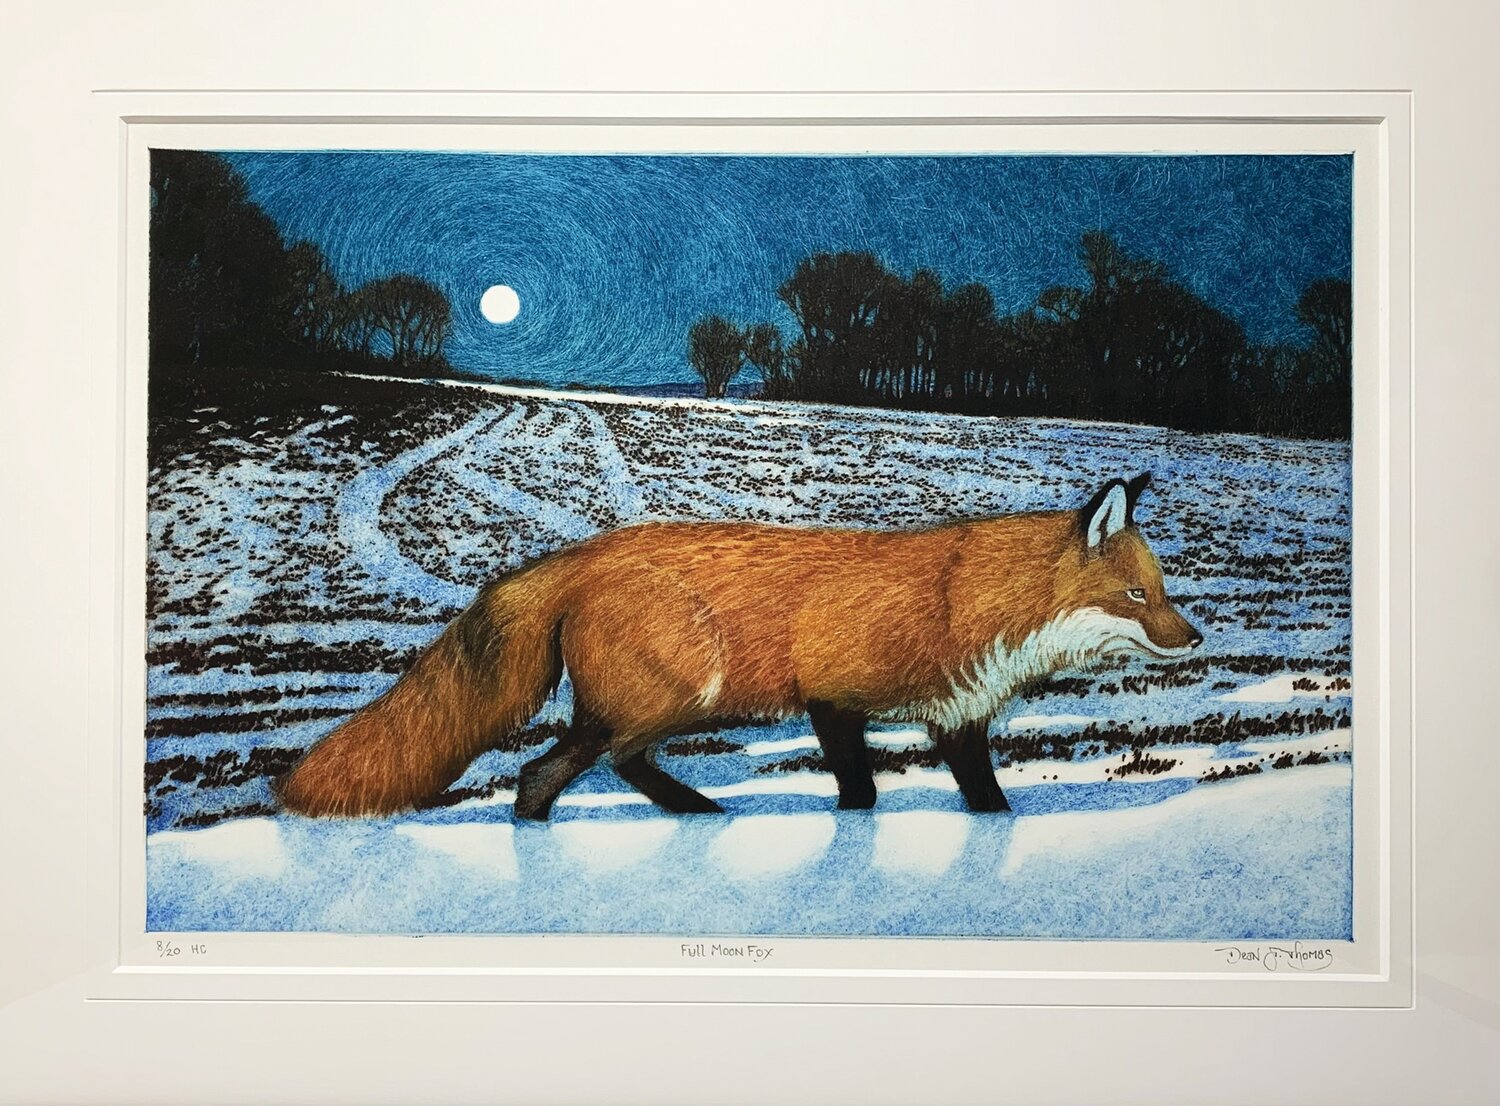 “Full Moon Fox” by Dean Thomas, a drypoint engraving, was featured in the 2022 Juried Art Show at Phillips’ Mill.